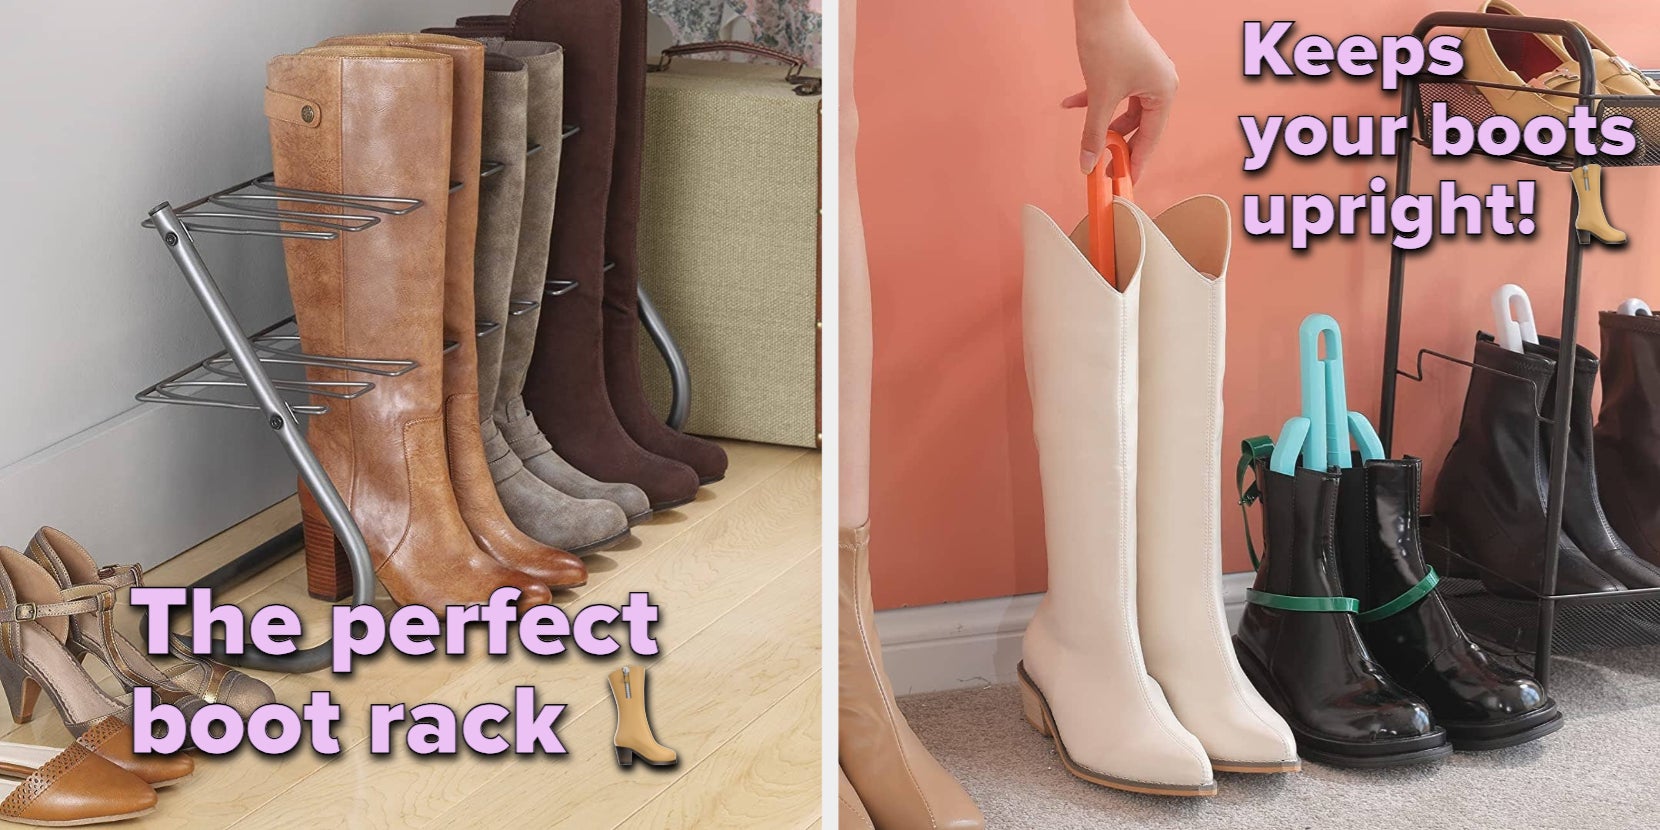 Easy Storage for Winter Boots, Keeps Them Upright-No Slouching or